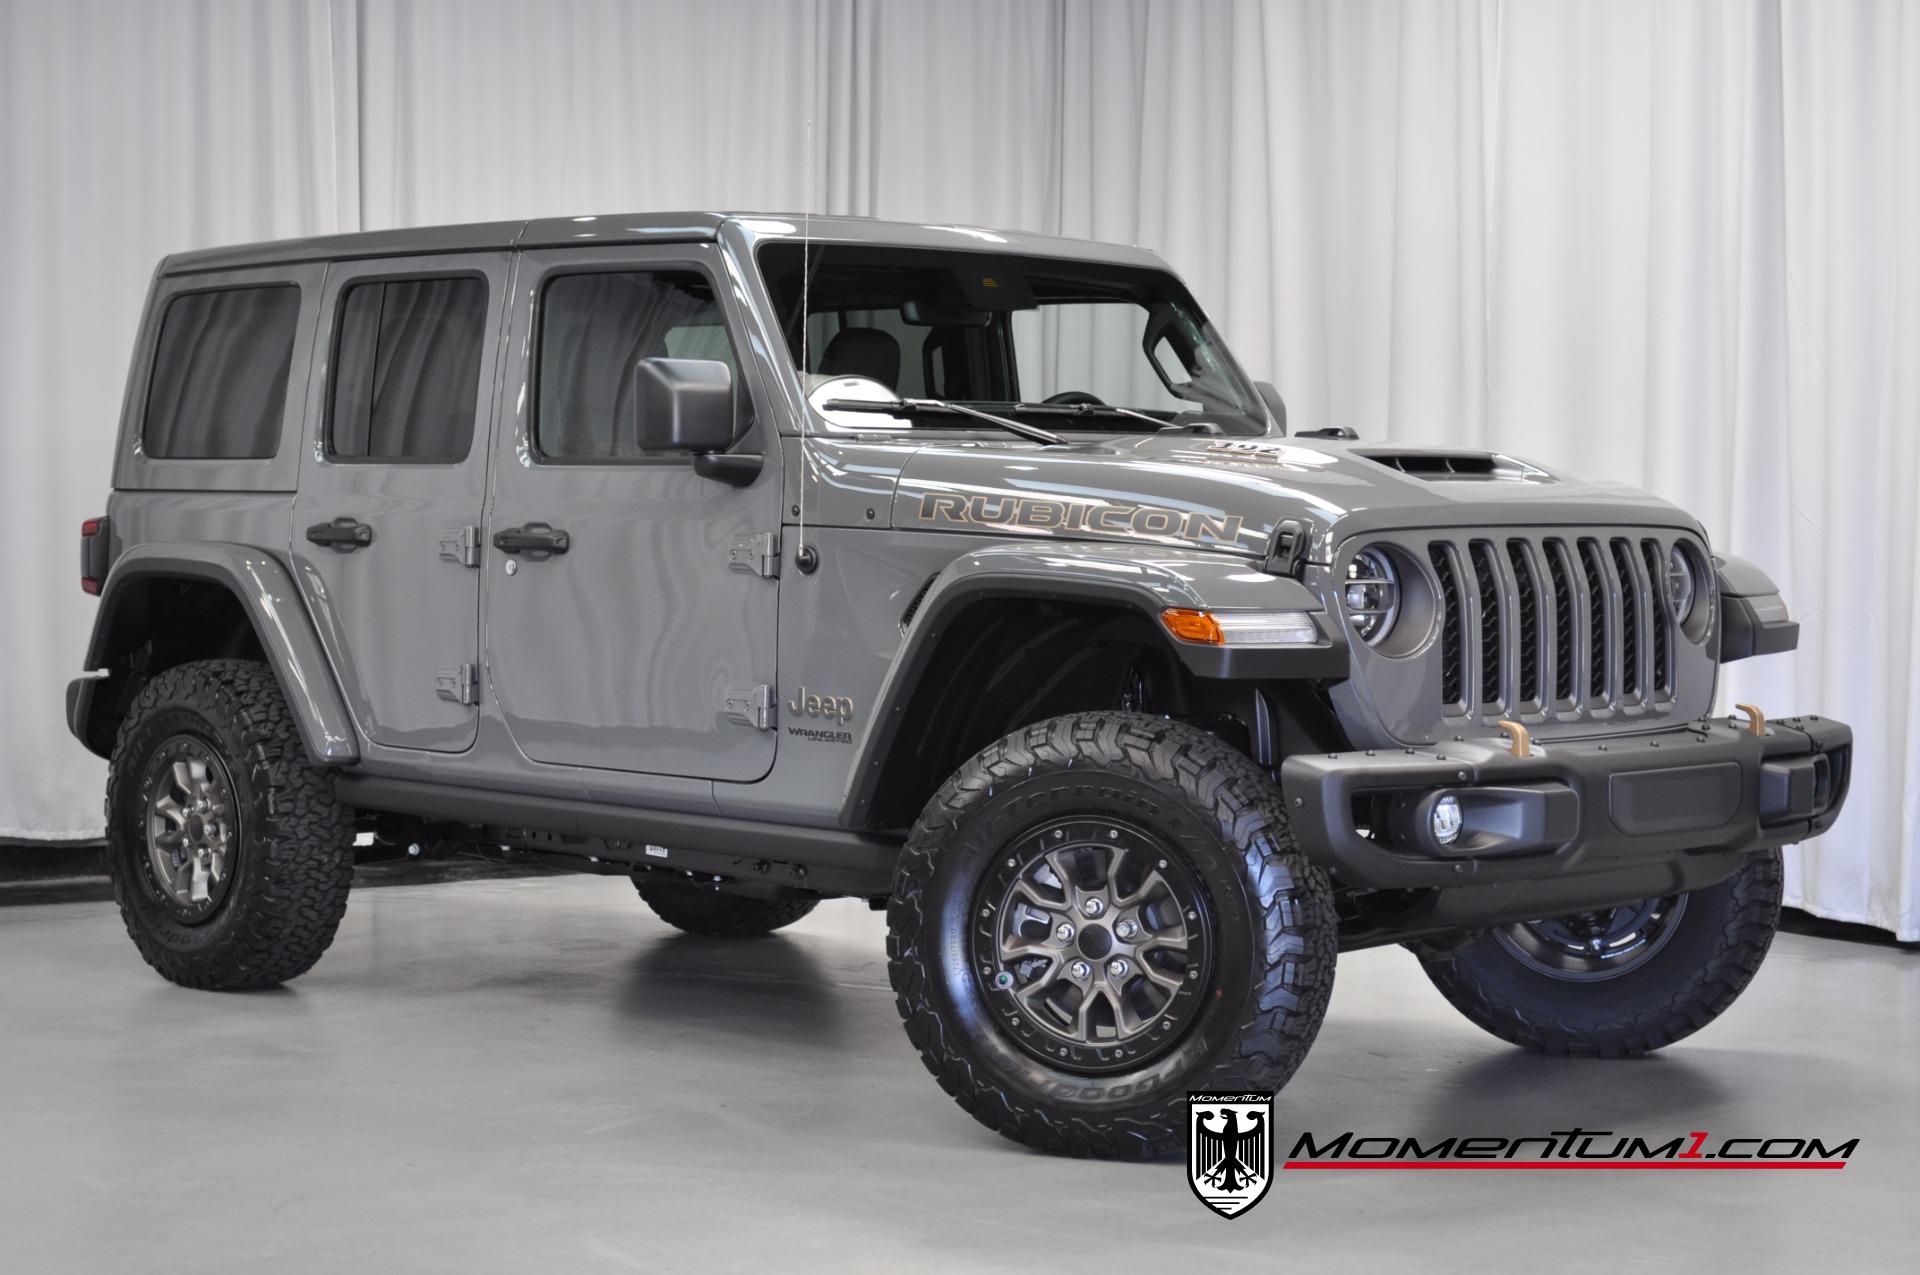 Used 2021 Jeep Wrangler Unlimited Rubicon 392 For Sale (Sold) | Momentum  Motorcars Inc Stock #840237